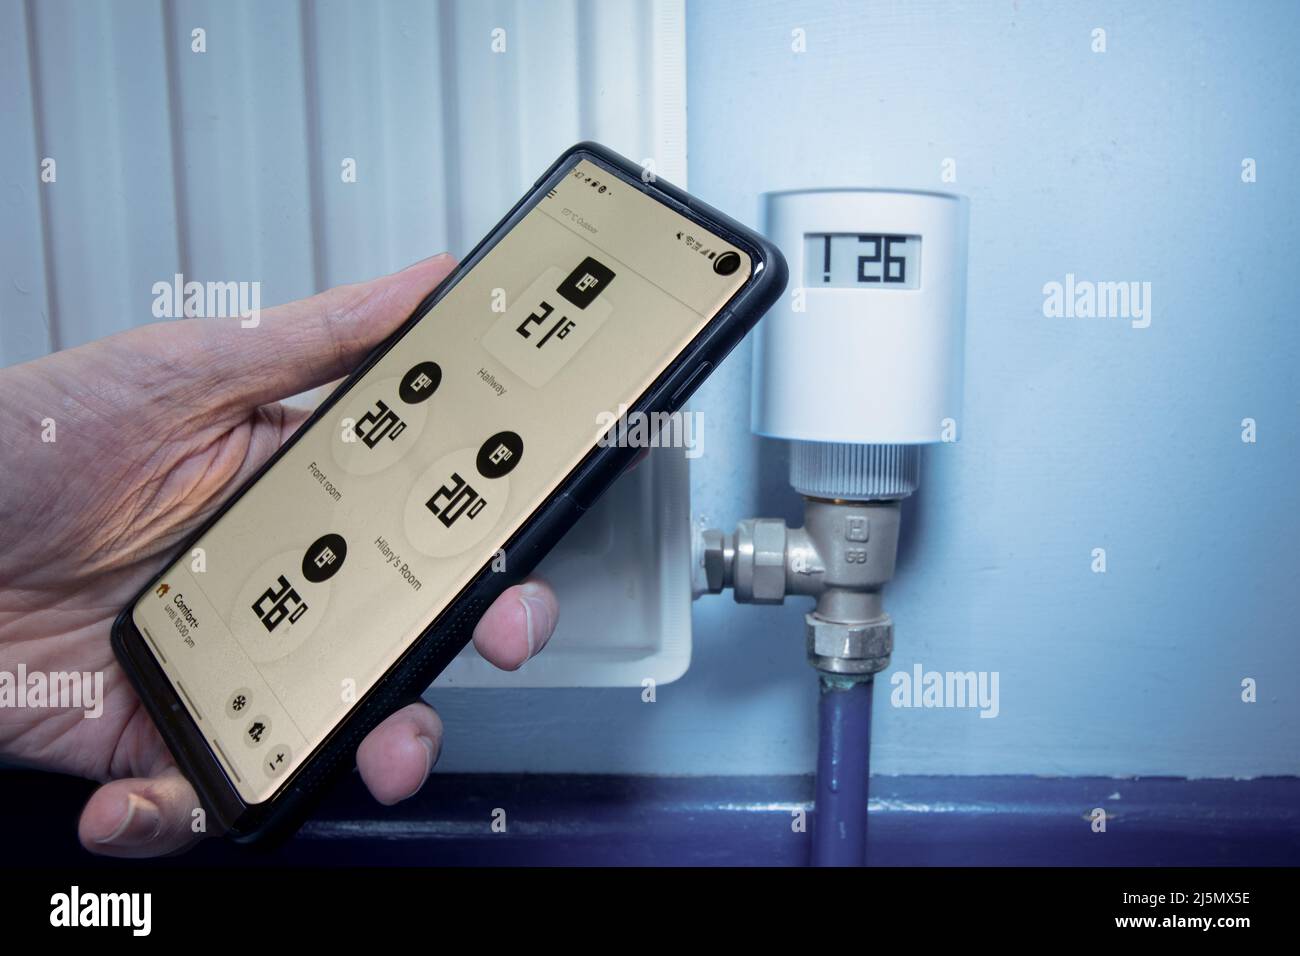 A smart radiator valve connecting to a smartphone app Stock Photo